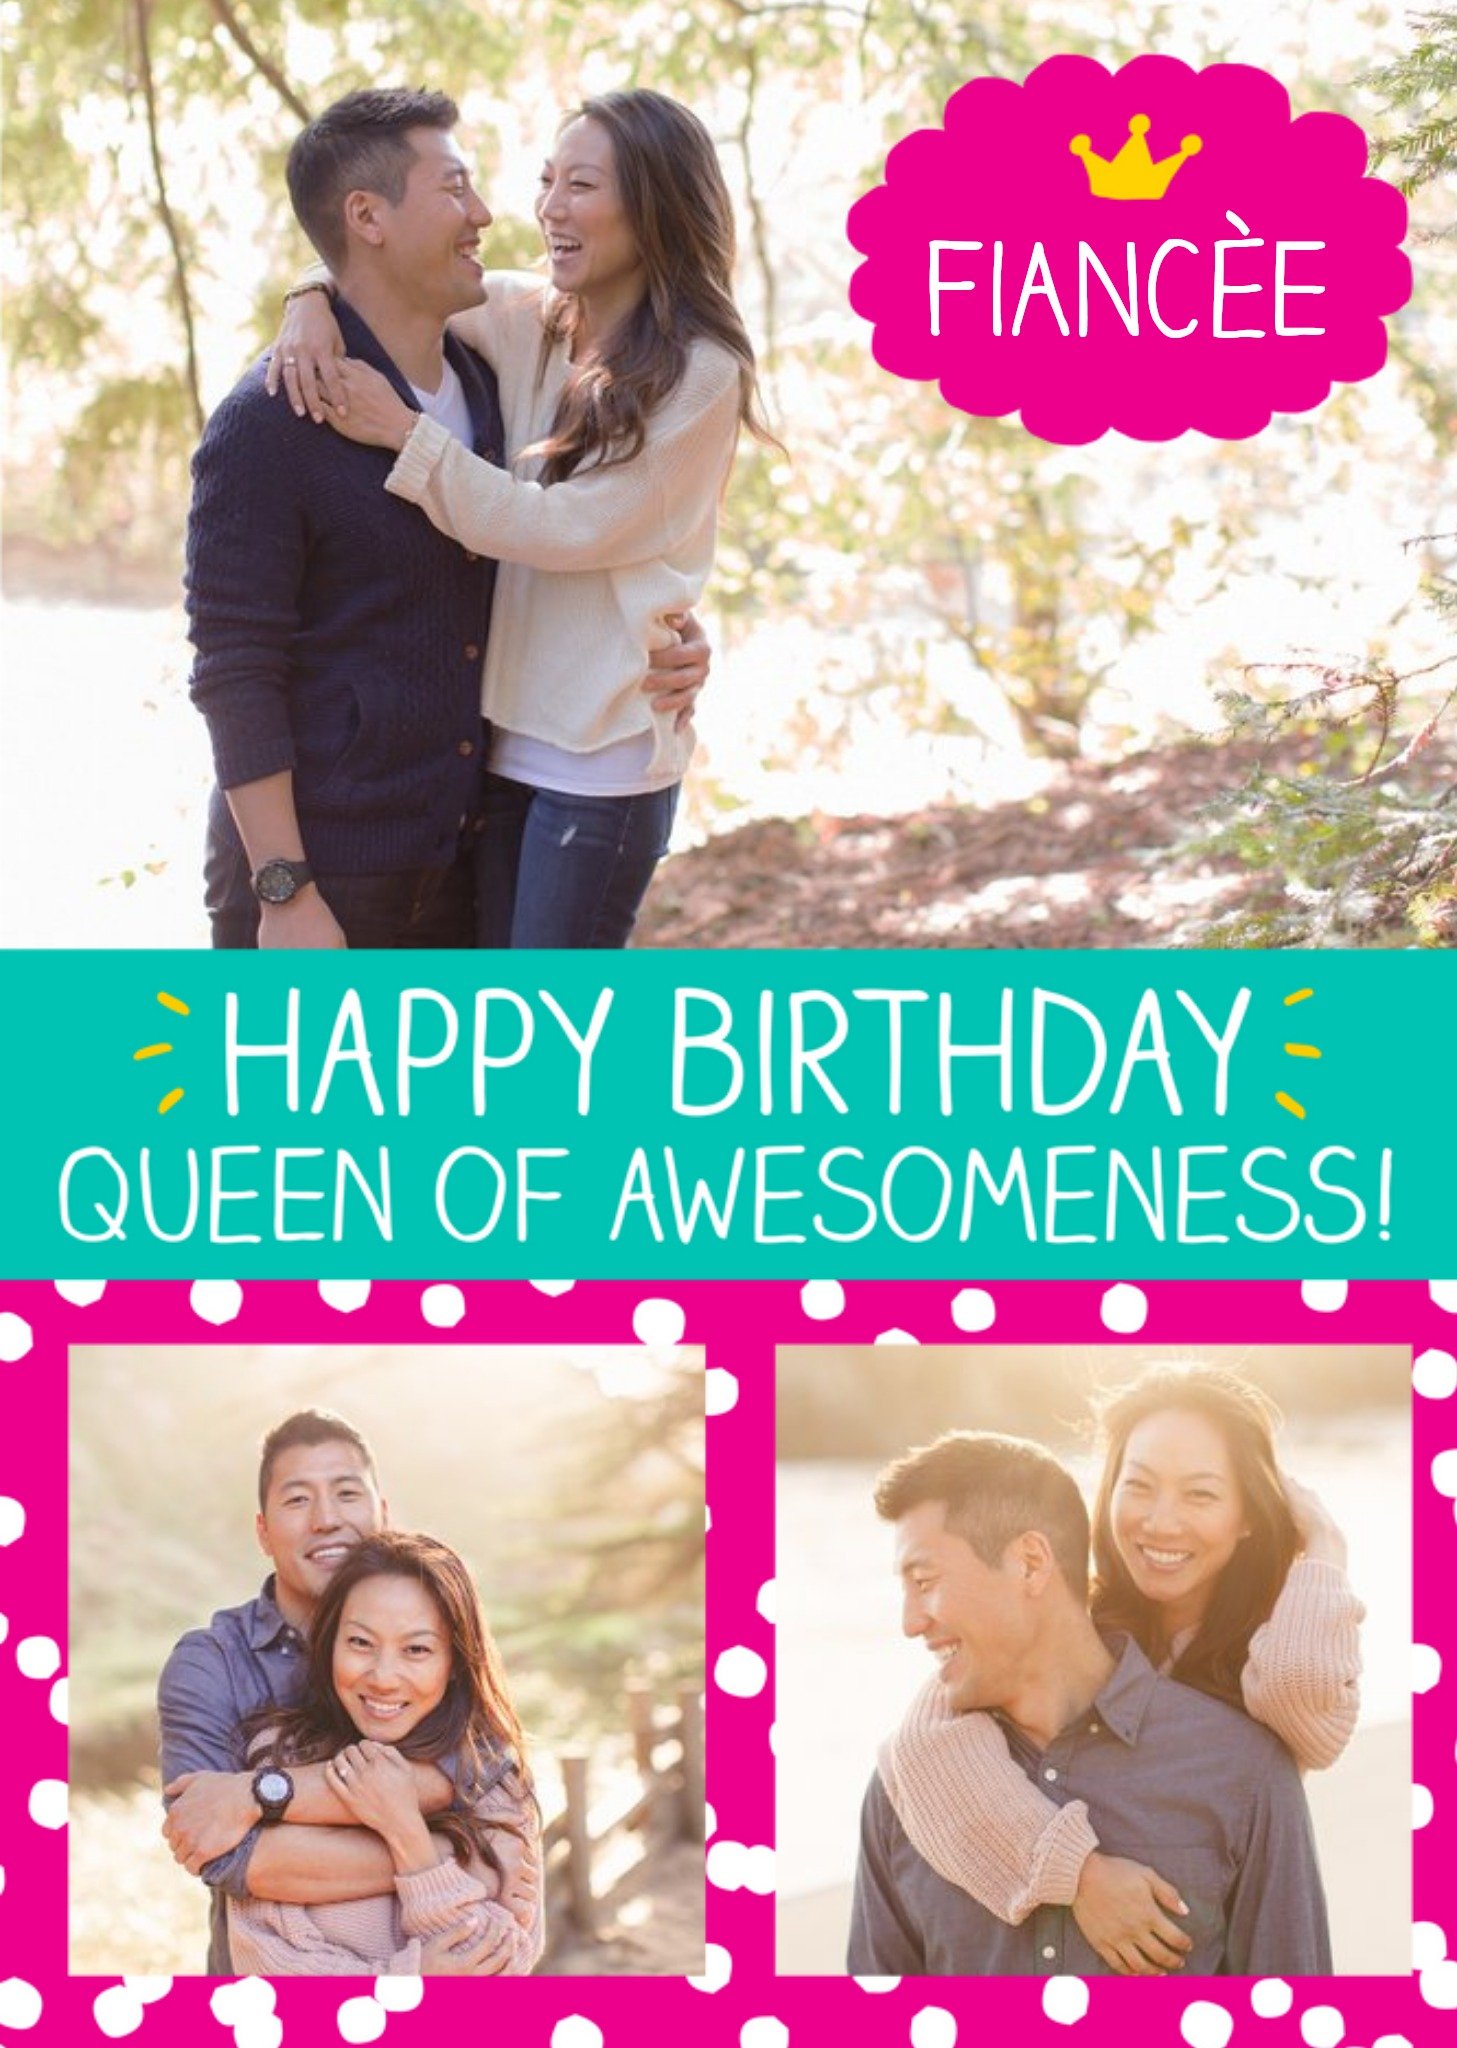 Happy Jackson Fiancee Queen Of Awesomeness Personalised Photo Upload Birthday Card, Large